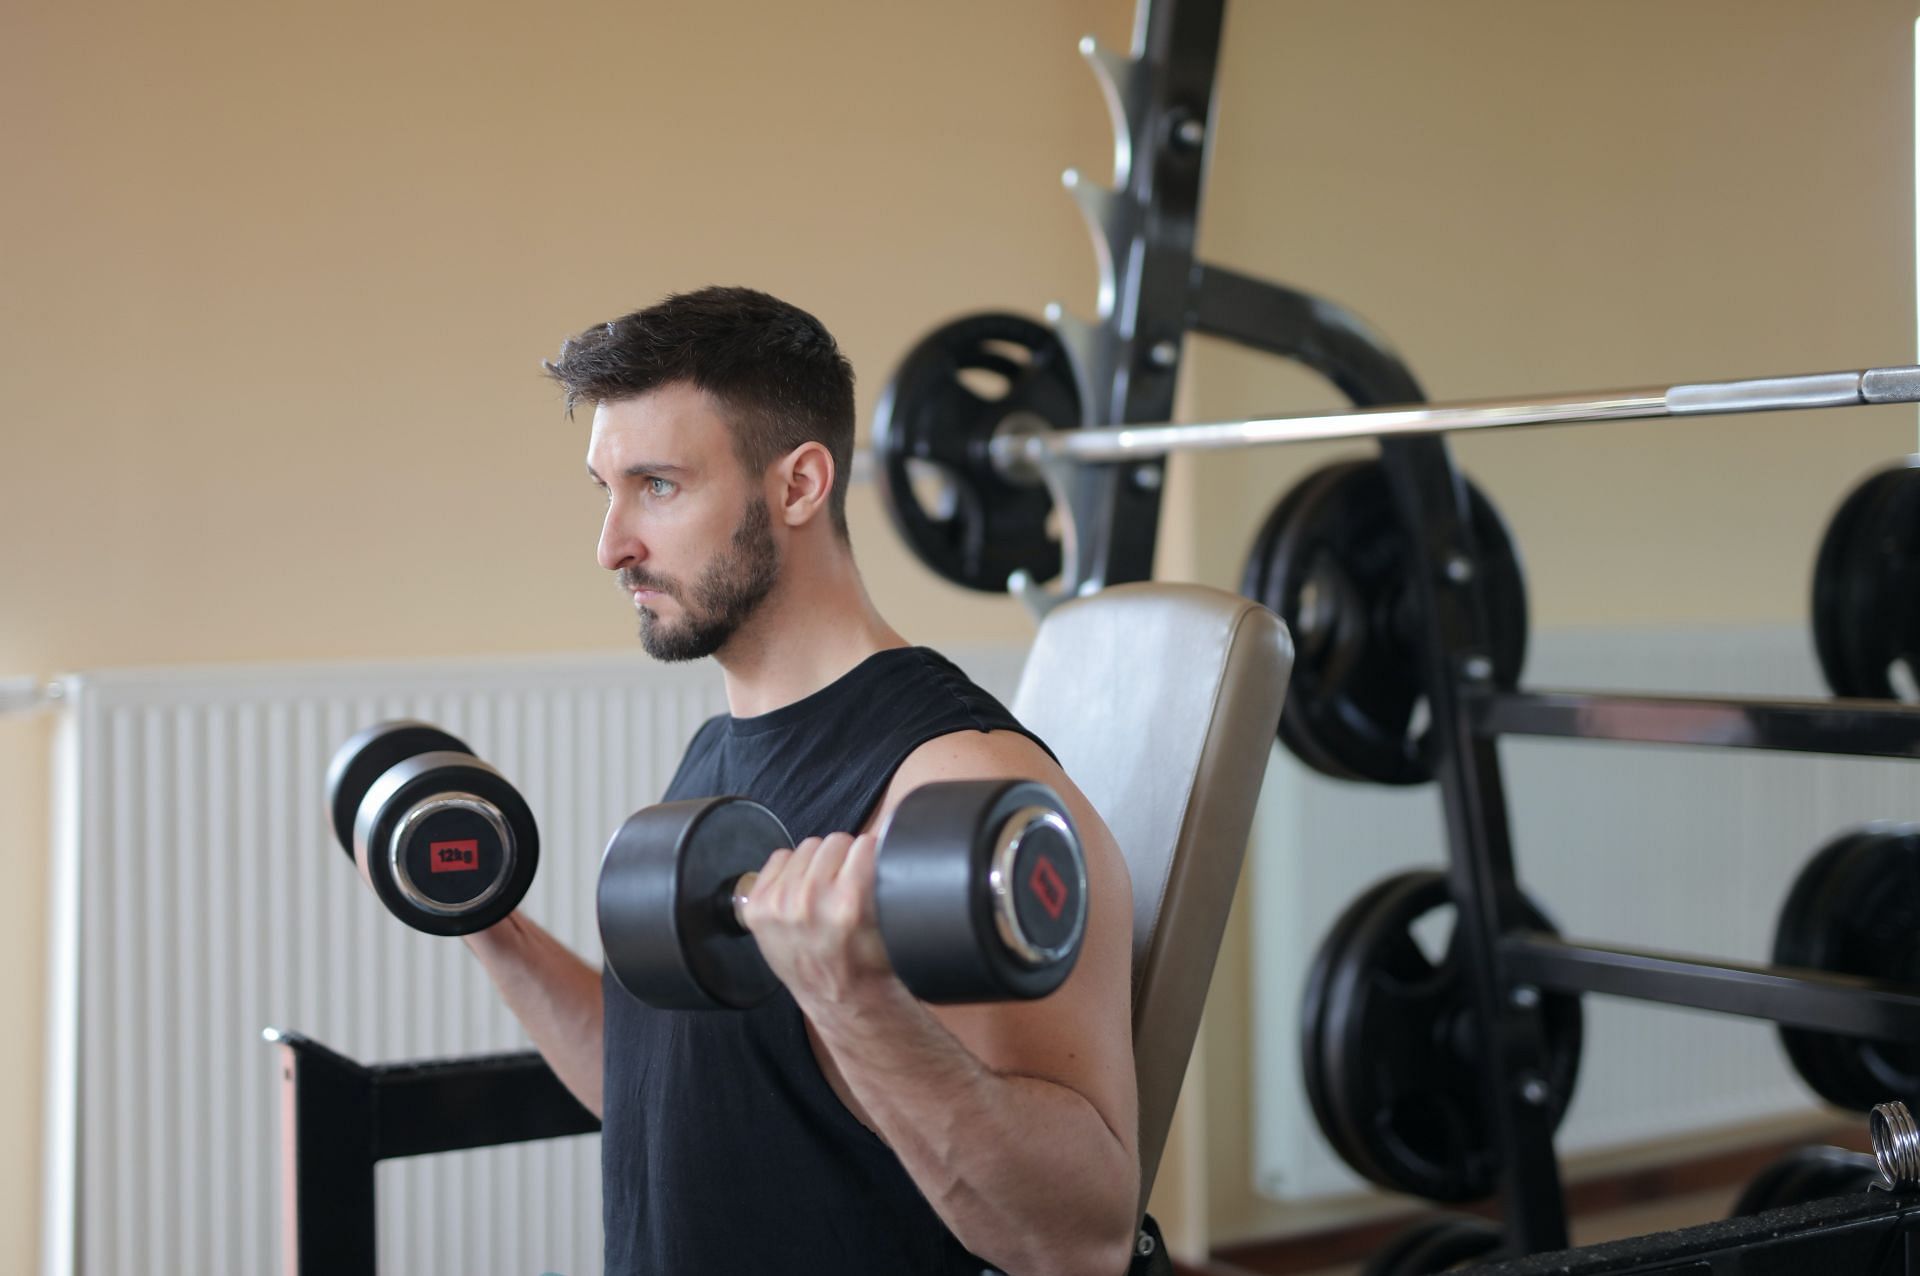 Best and effective dumbbell exercises for chest muscles. (Image via Pexels/Andrea Piacquadio)